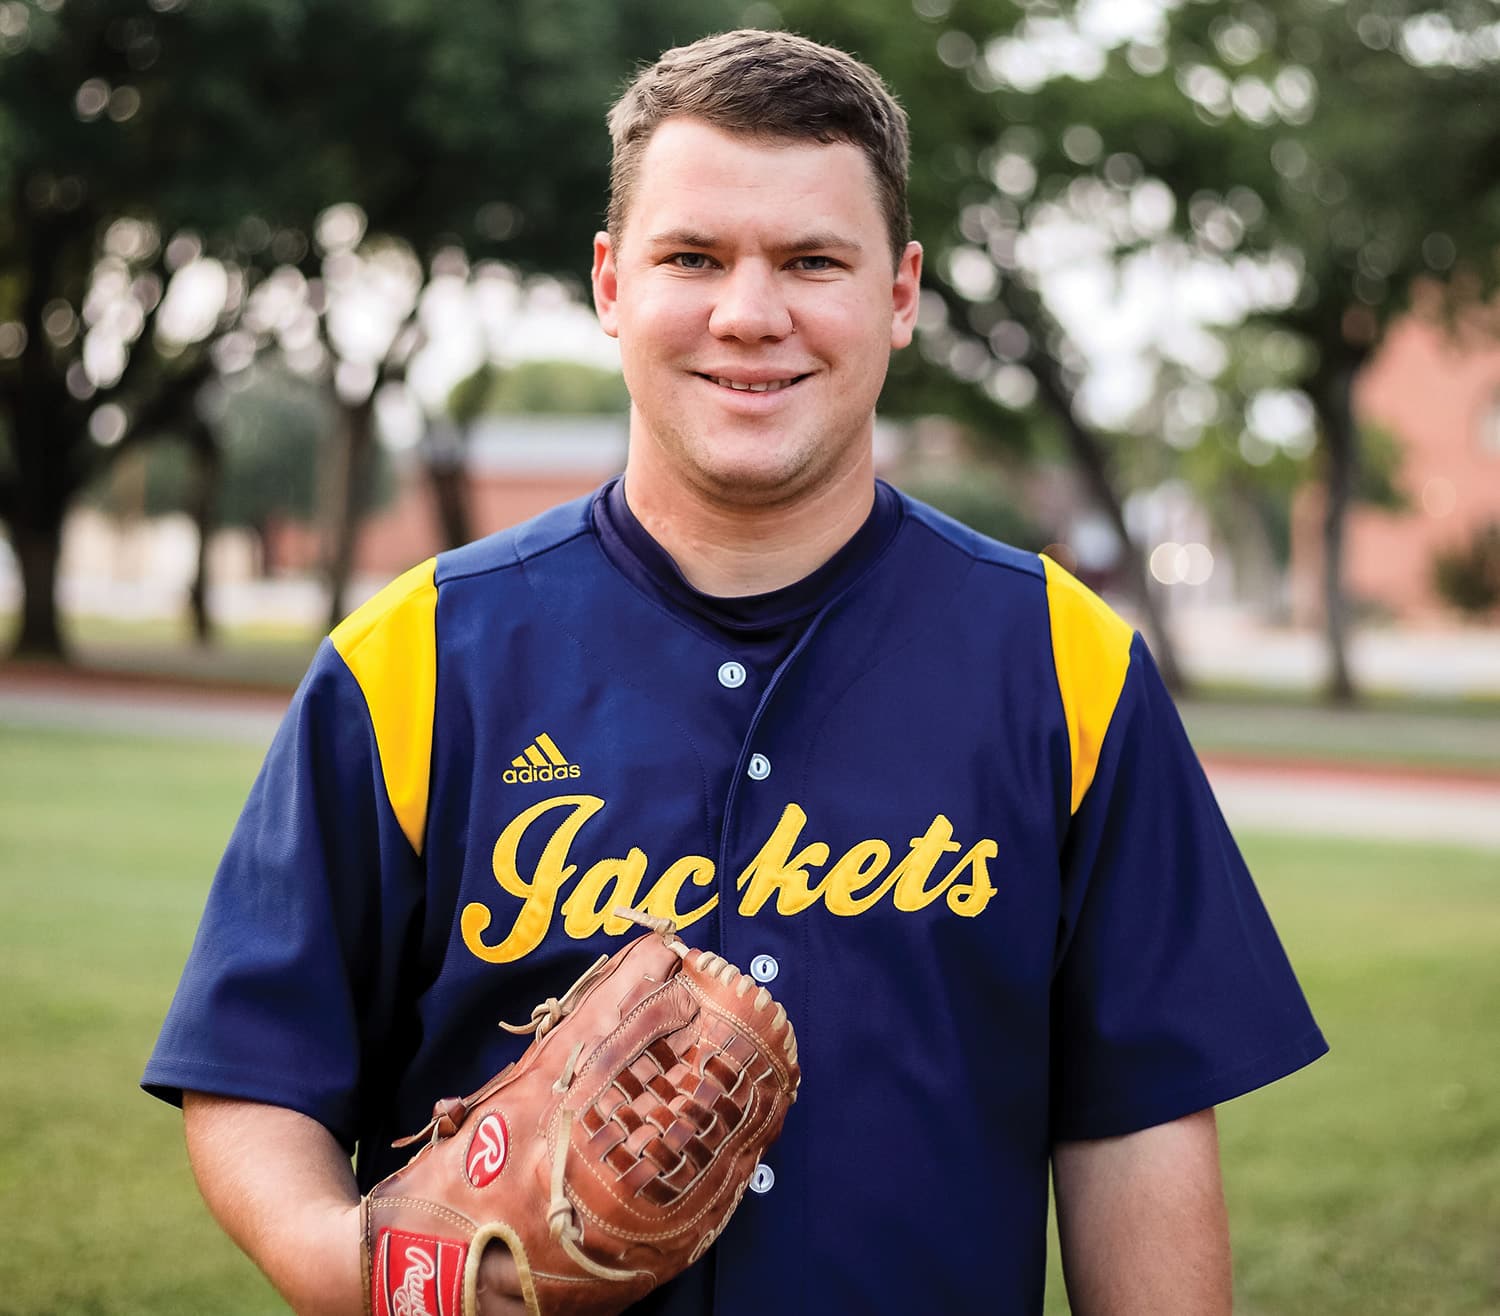 Baseball player from Howard Payne University holding a glove and smiling at the camera. | HPU